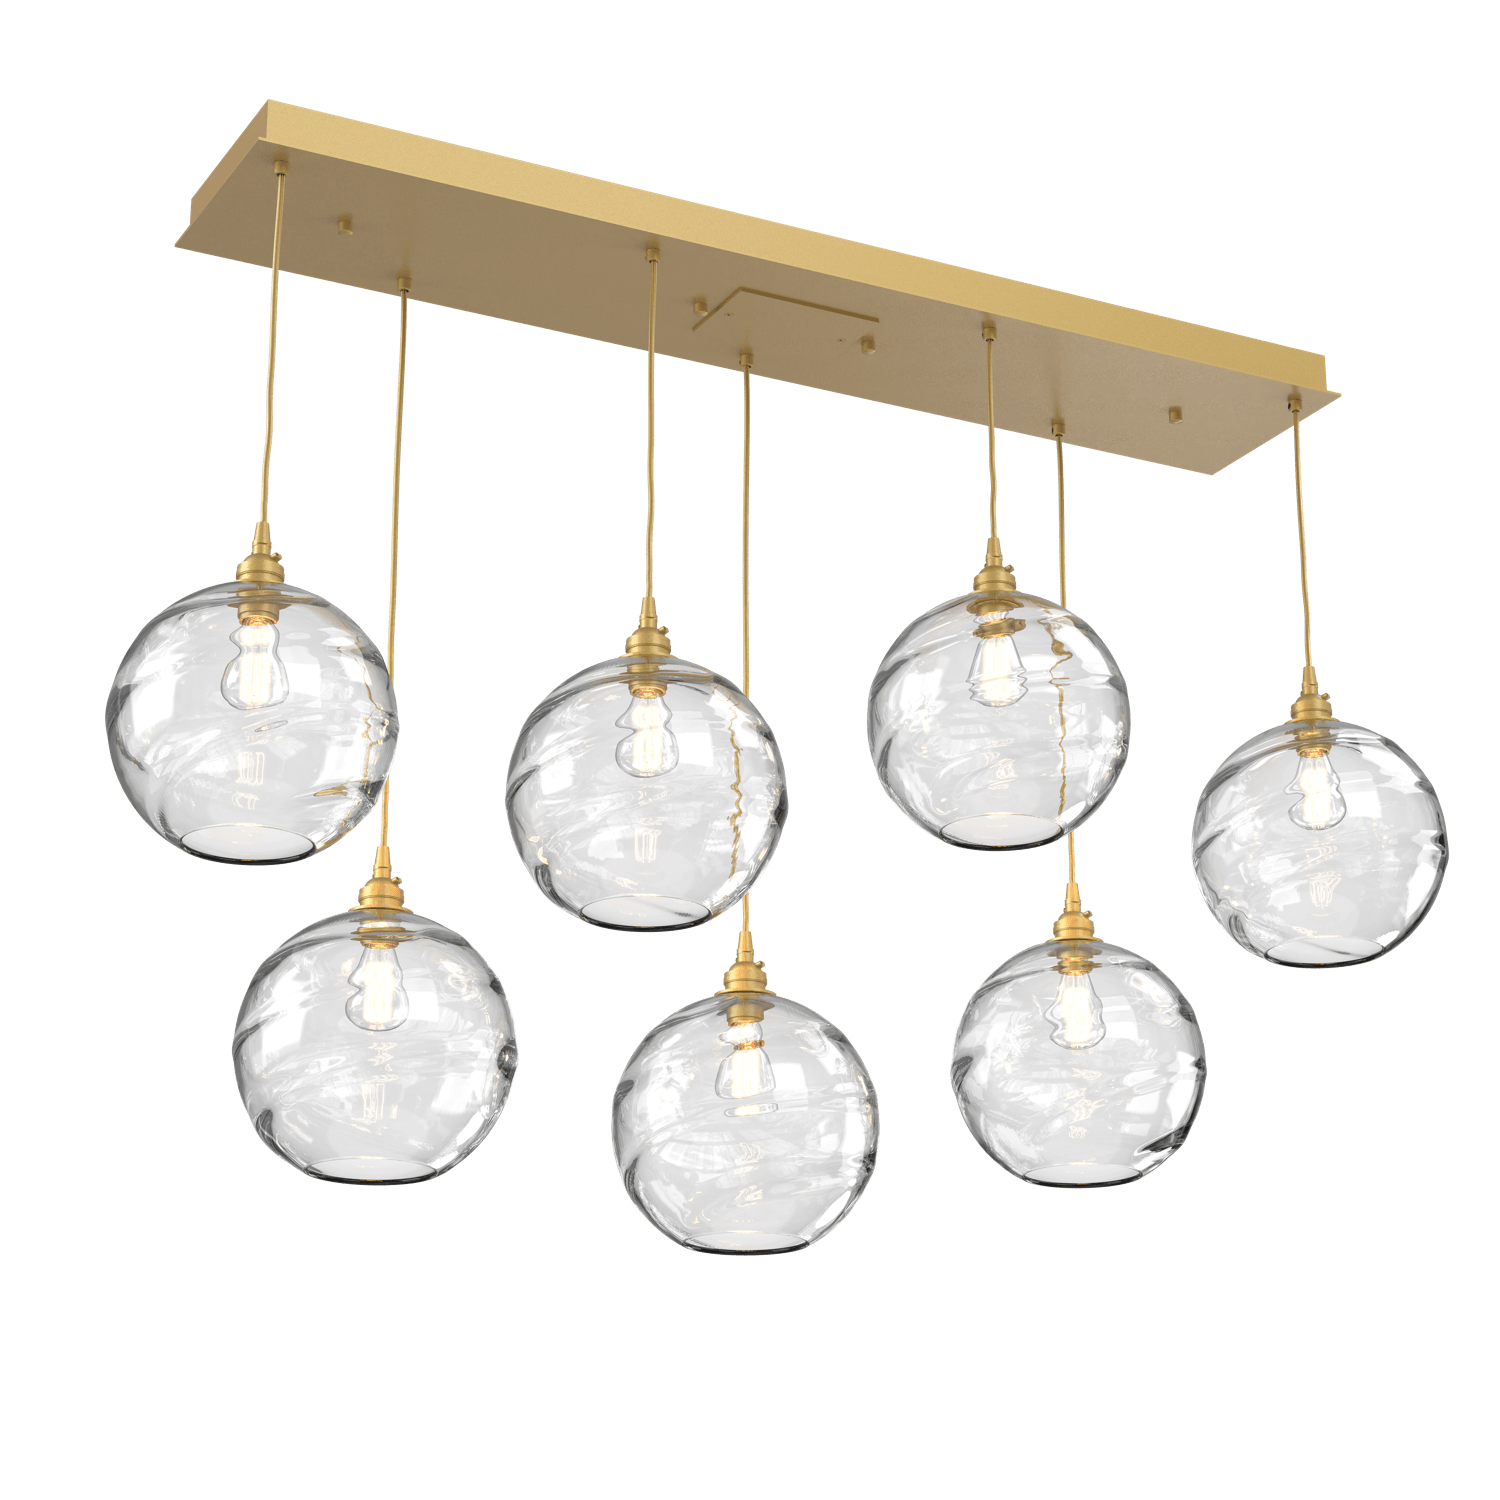 PLB0047-07-GB-OC-Hammerton-Studio-Optic-Blown-Glass-Terra-7-light-linear-pendant-chandelier-with-gilded-brass-finish-and-optic-clear-blown-glass-shades-and-incandescent-lamping